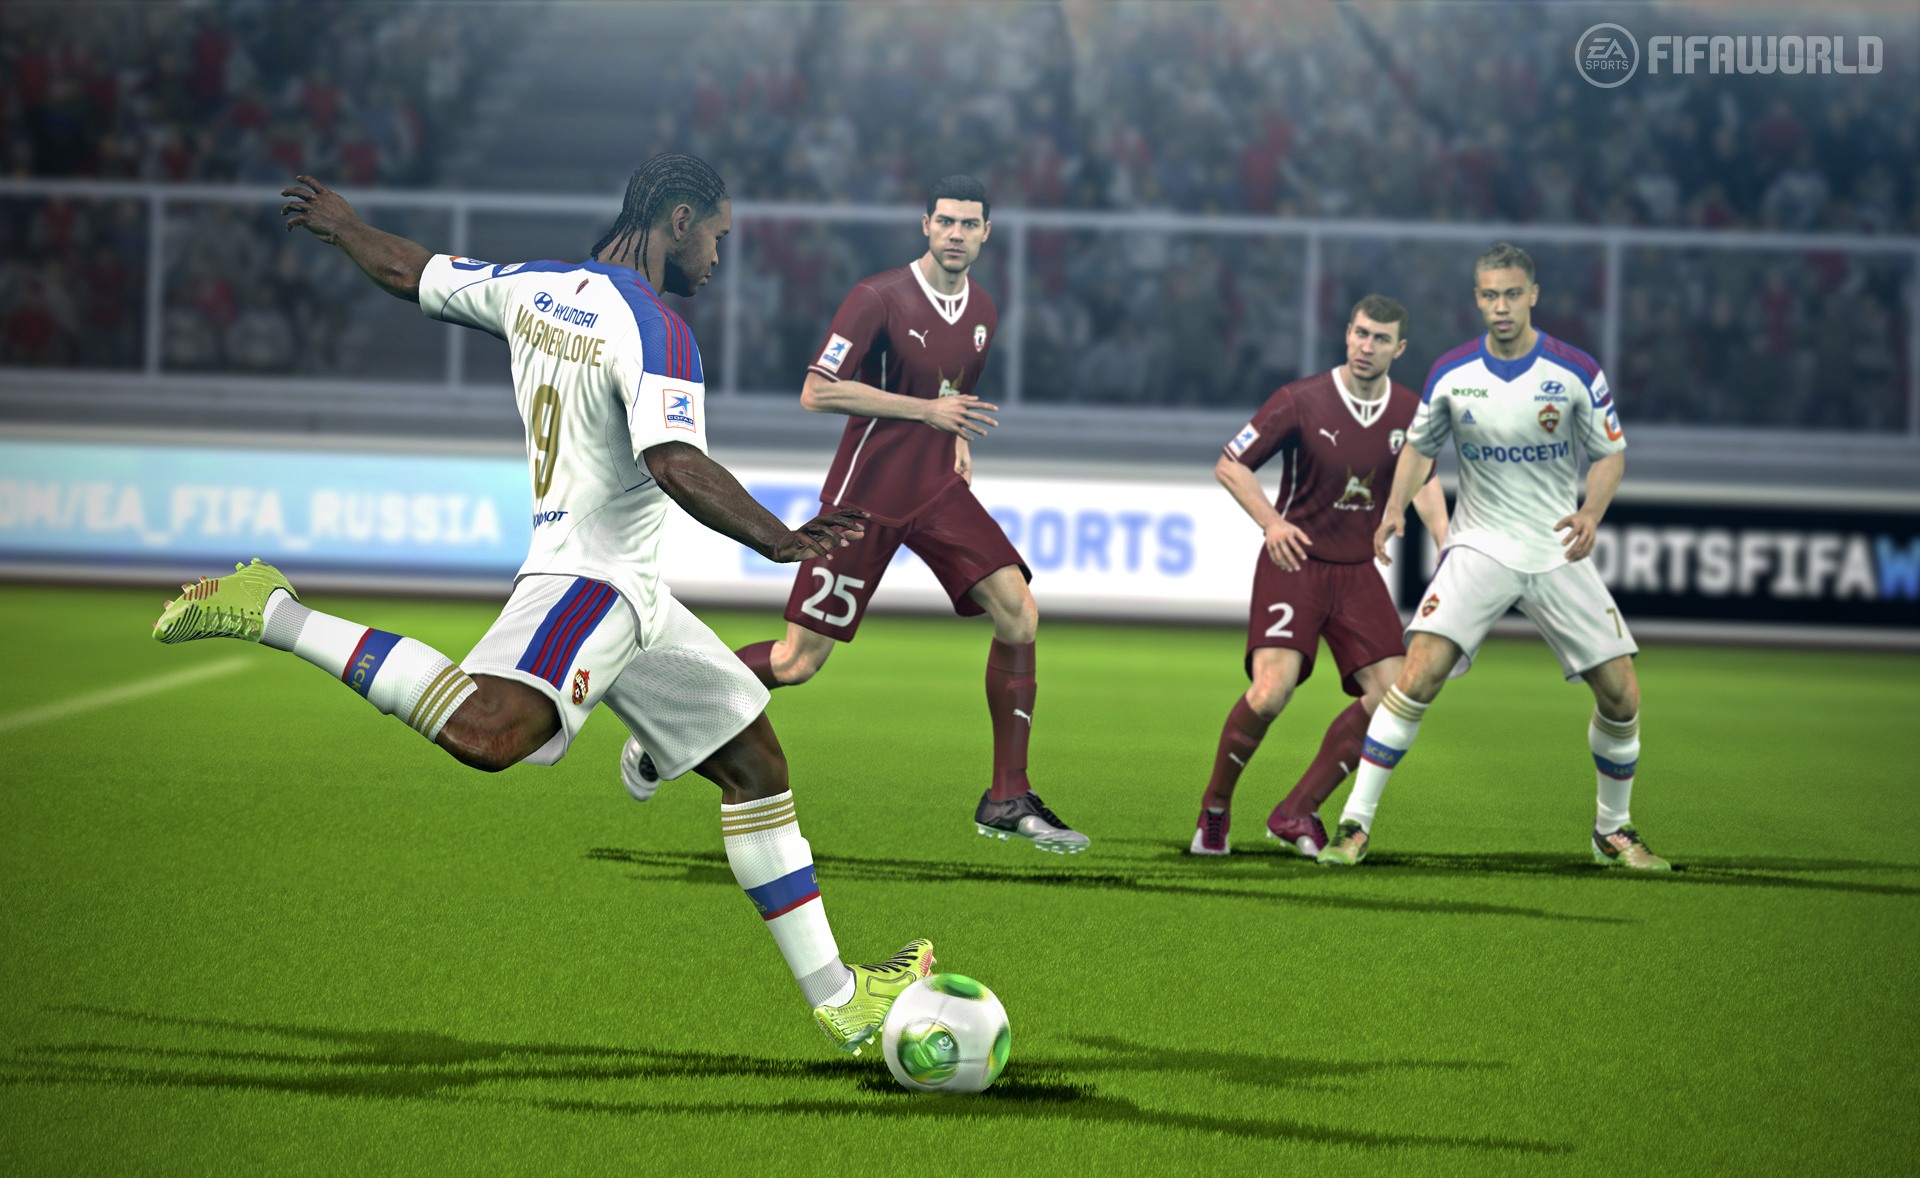 FIFA World Online FreeToPlay Soccer Title Enters Open Beta Phase